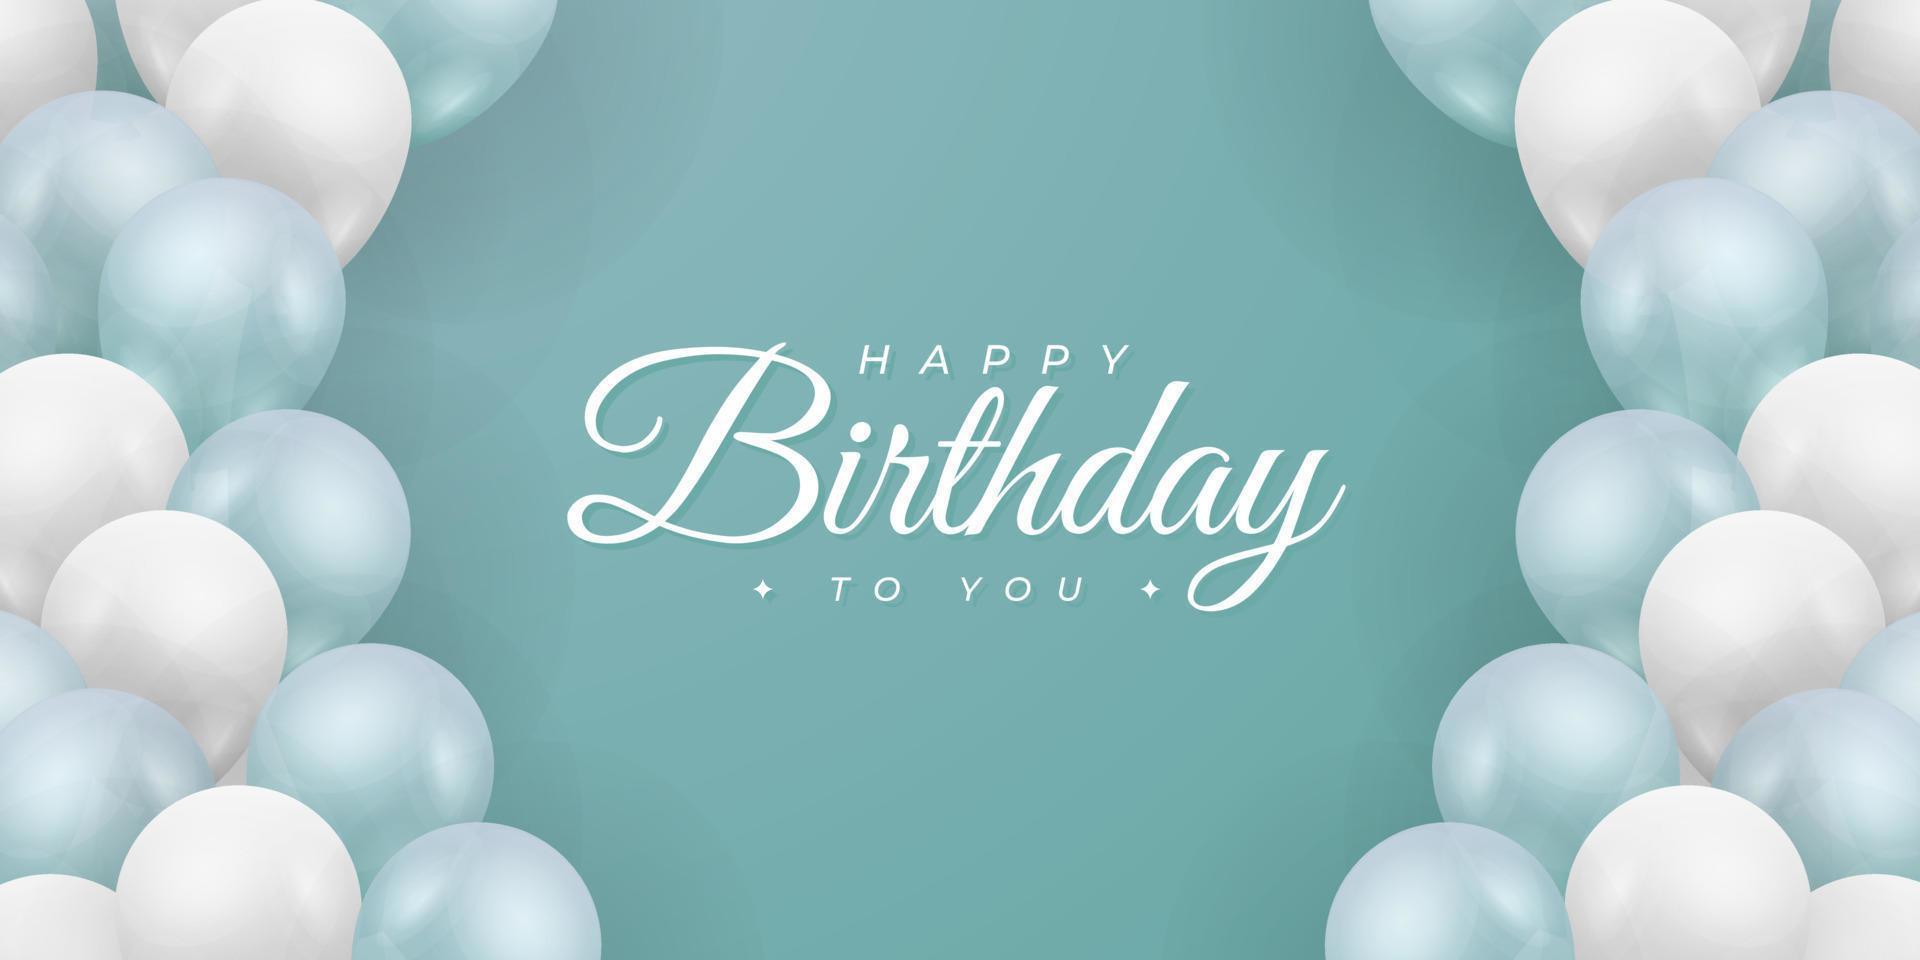 happy birthday background design . clean and simple background for celebrating birthday . happy birthday greeting card . vector